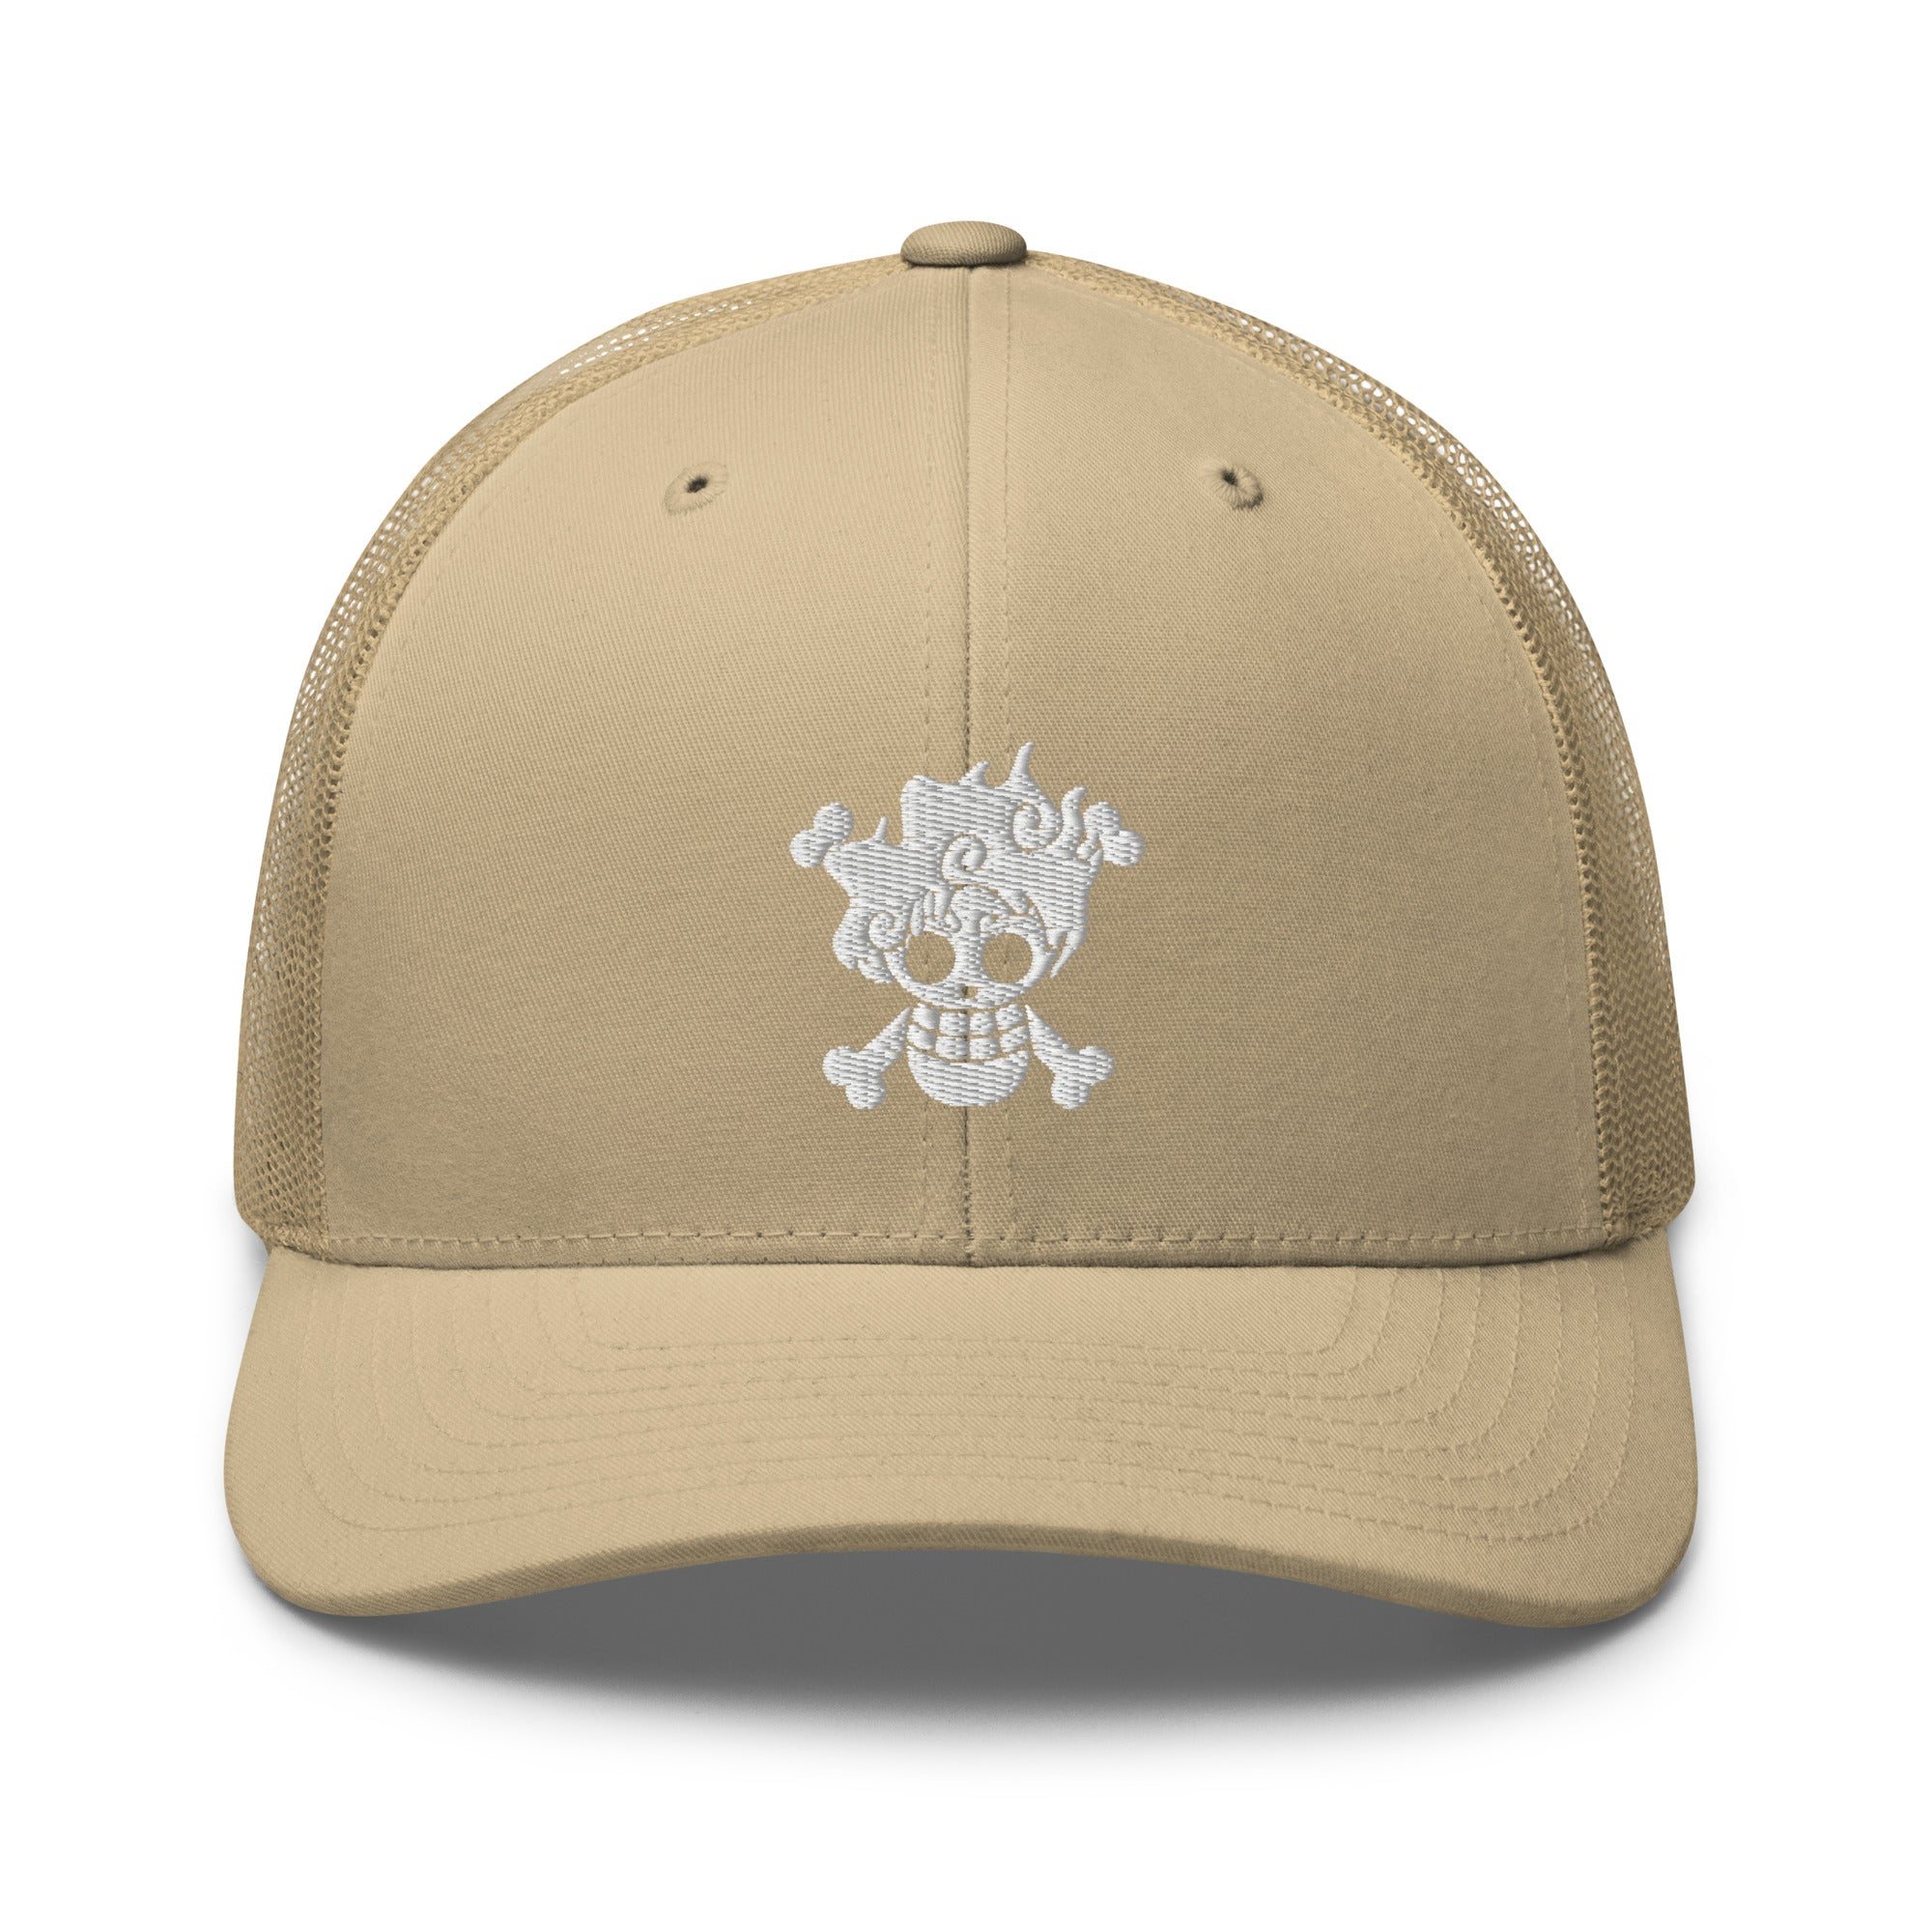 Luffy 5th Gear Embroidered Trucker Hat